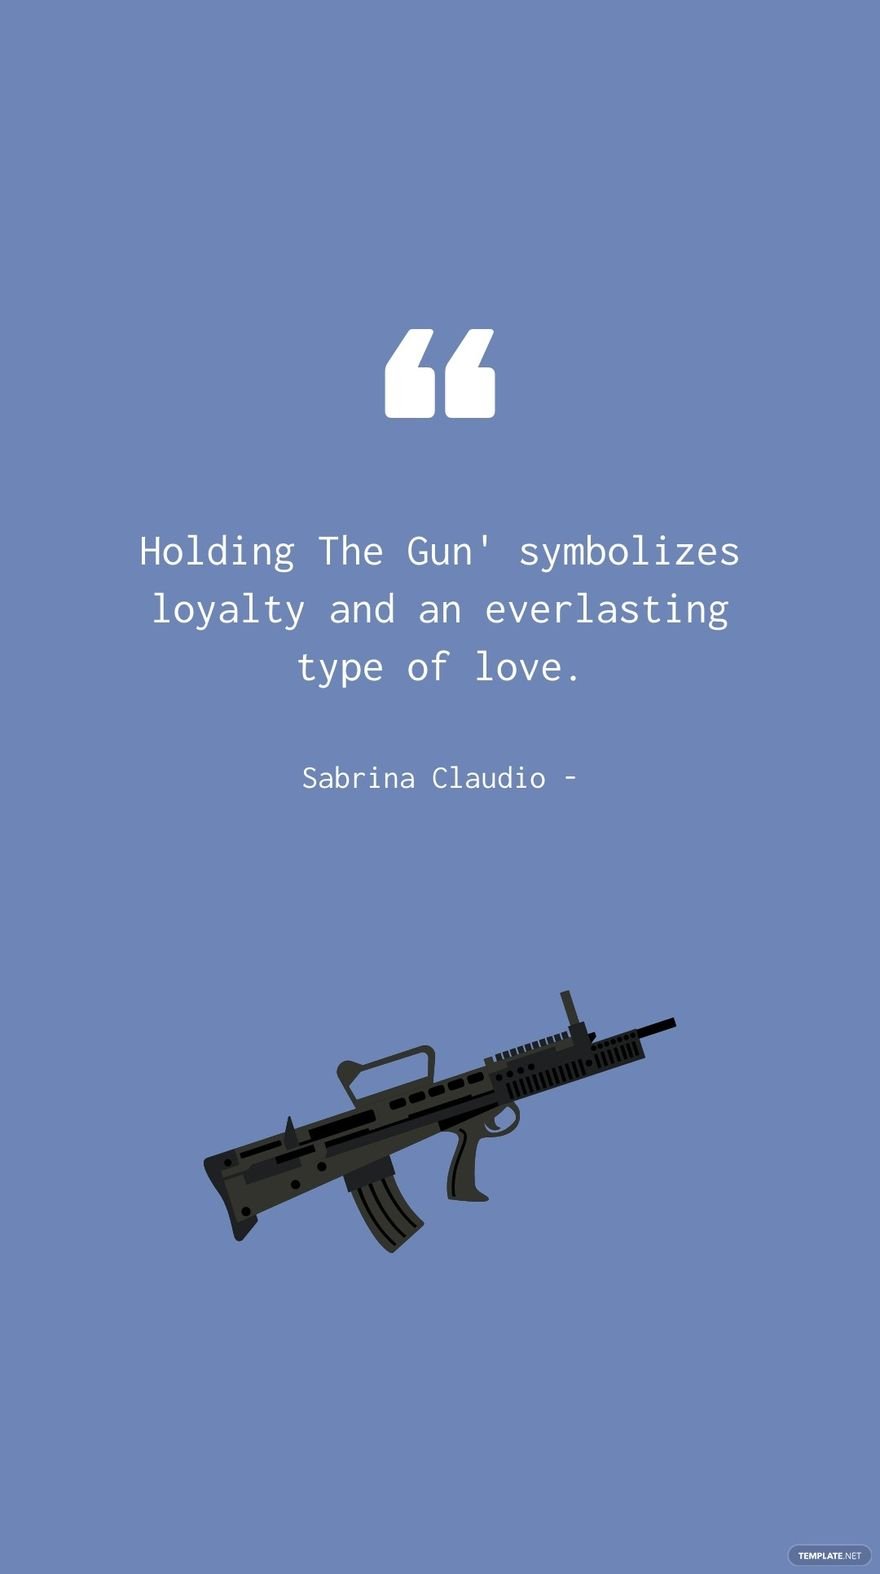 Free Sabrina Claudio - Holding The Gun' symbolizes loyalty and an everlasting type of love. in JPG